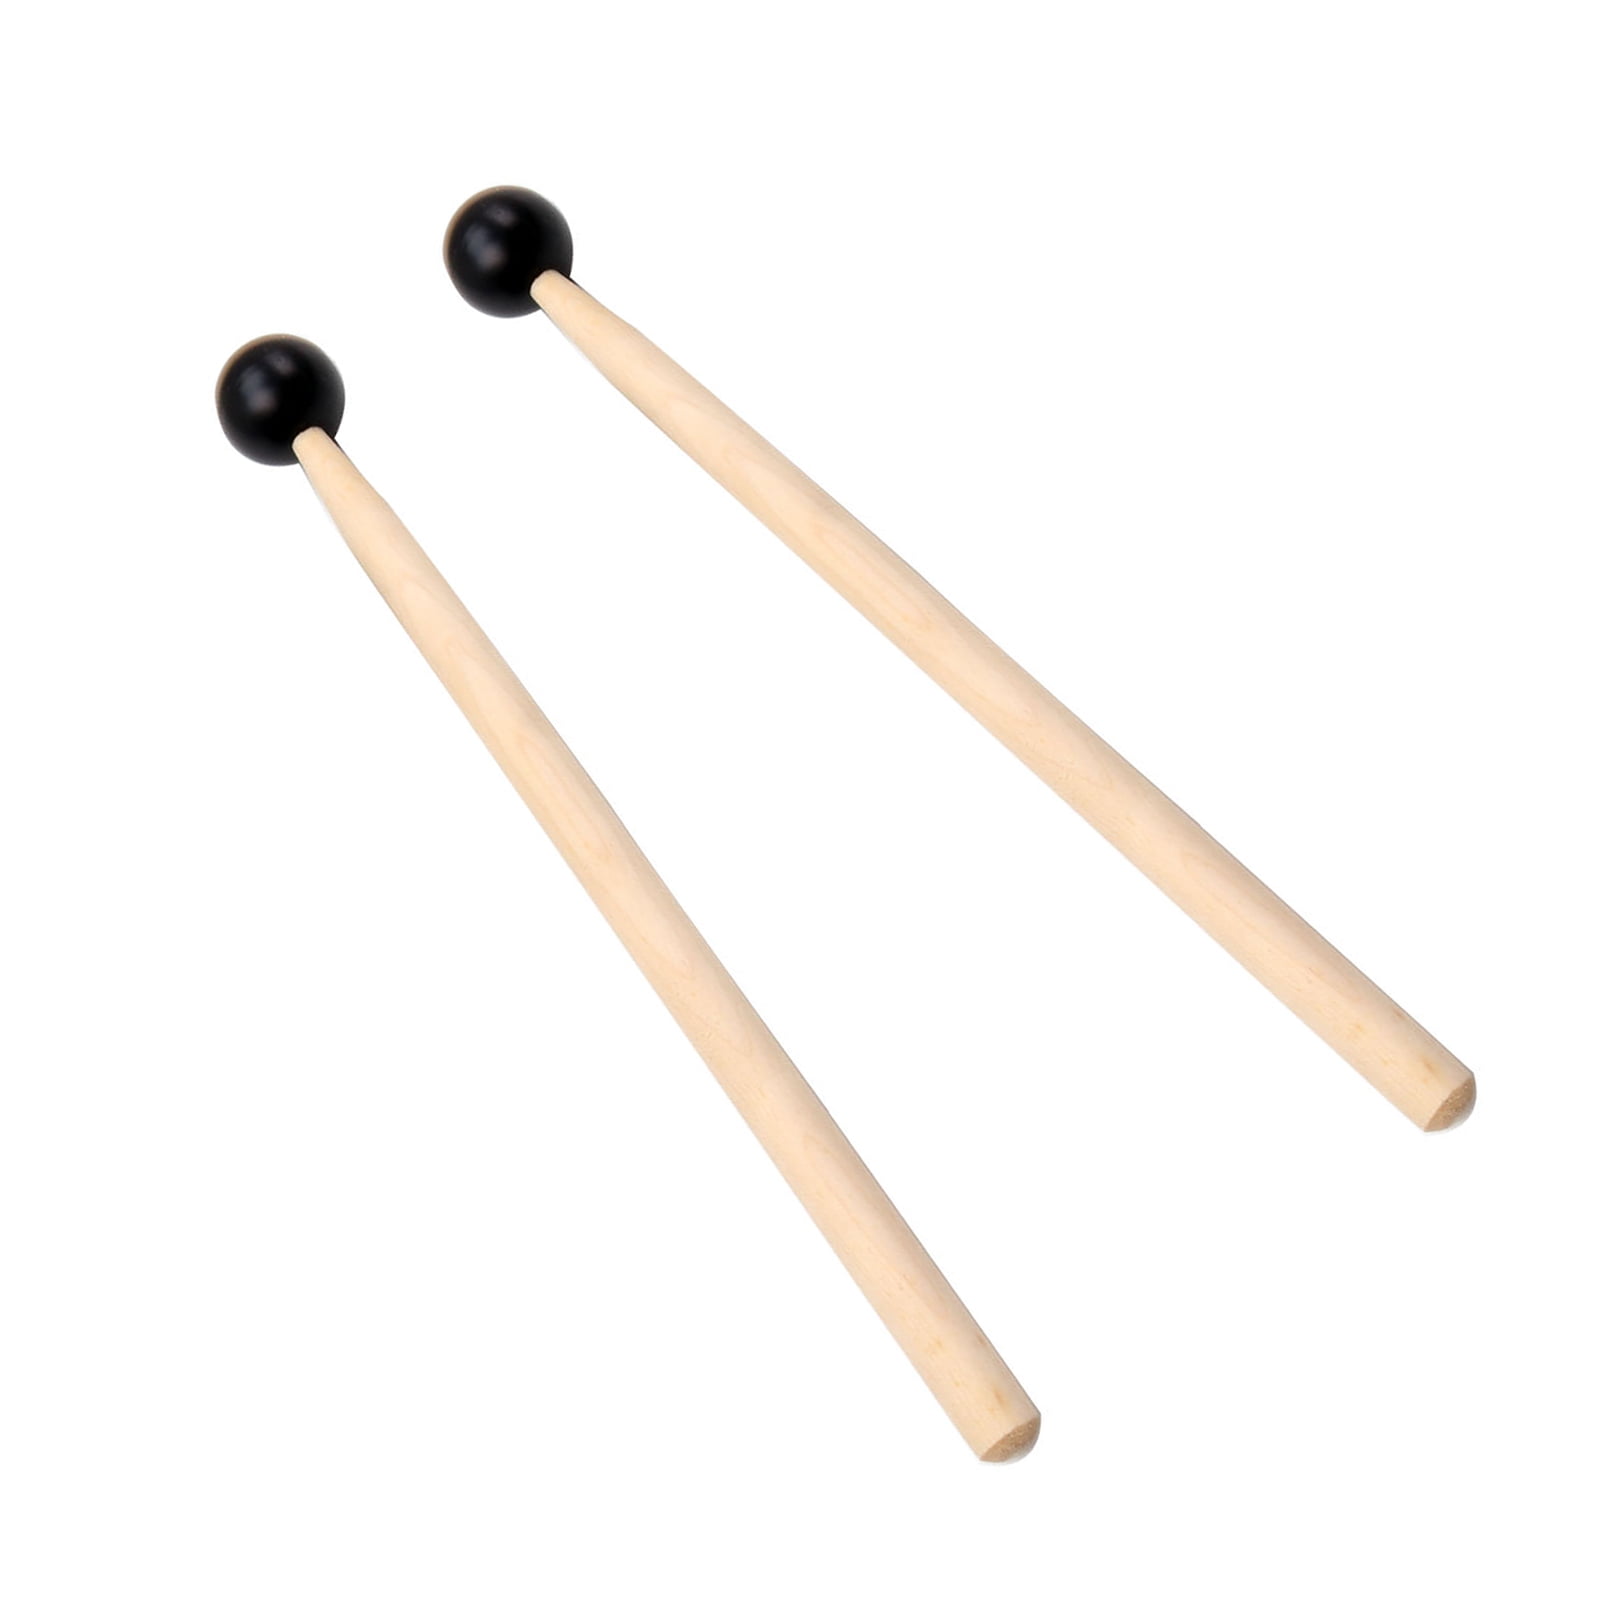 Marimba Mallets 1 Pair Keyboard Instrument Mallets Wooden Handle Rubber Heads Percussion Music Instrument Drumsticks 